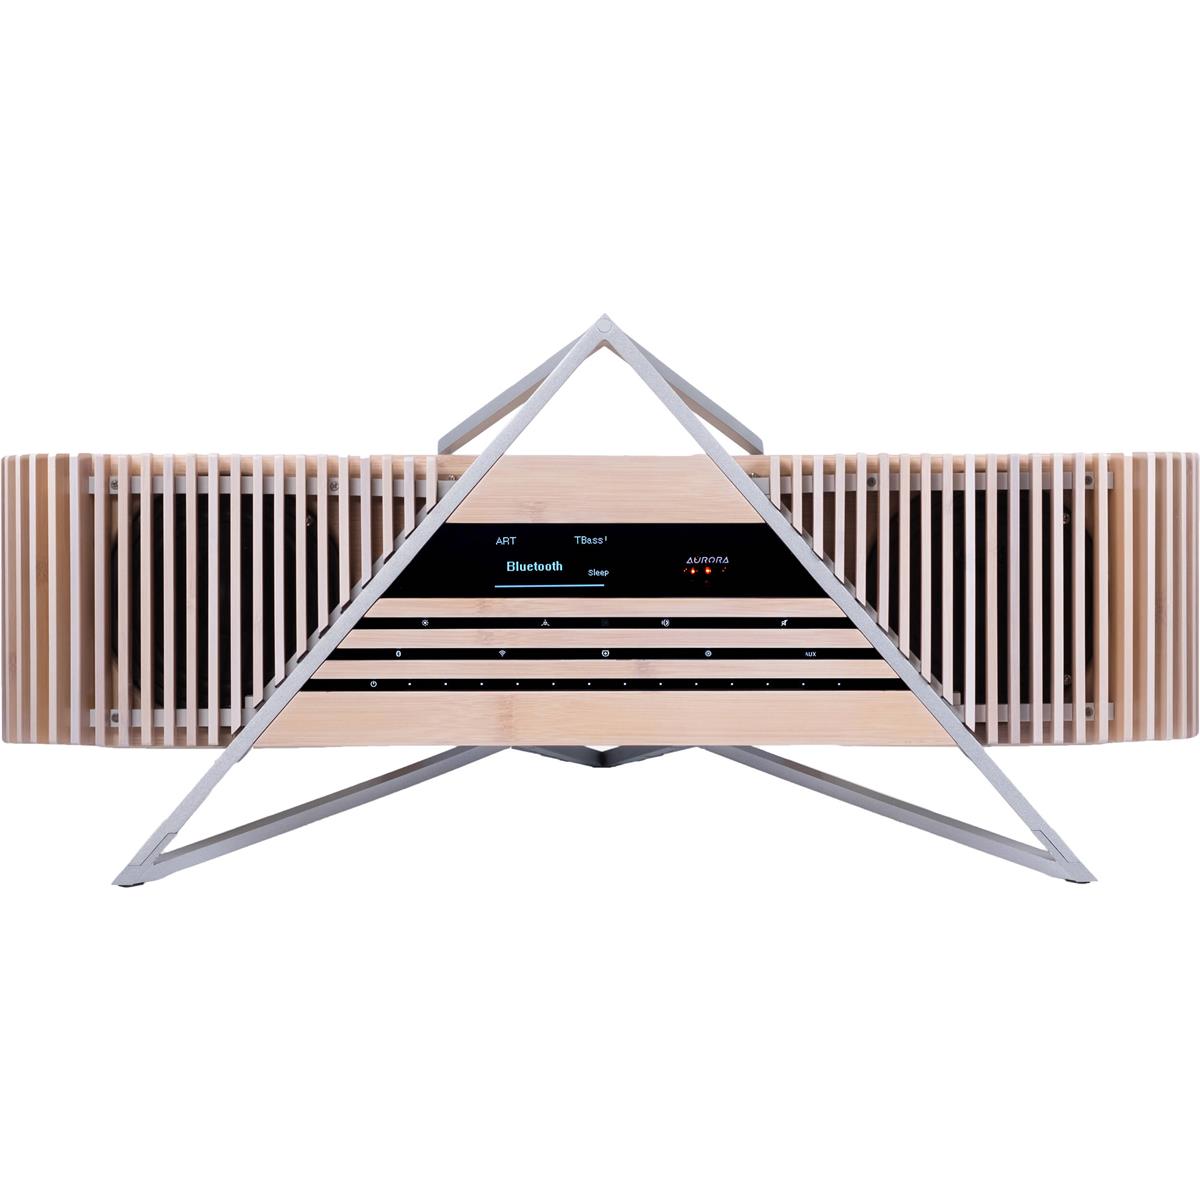 Image of iFi AUDIO Aurora All-in-One Wireless Music System